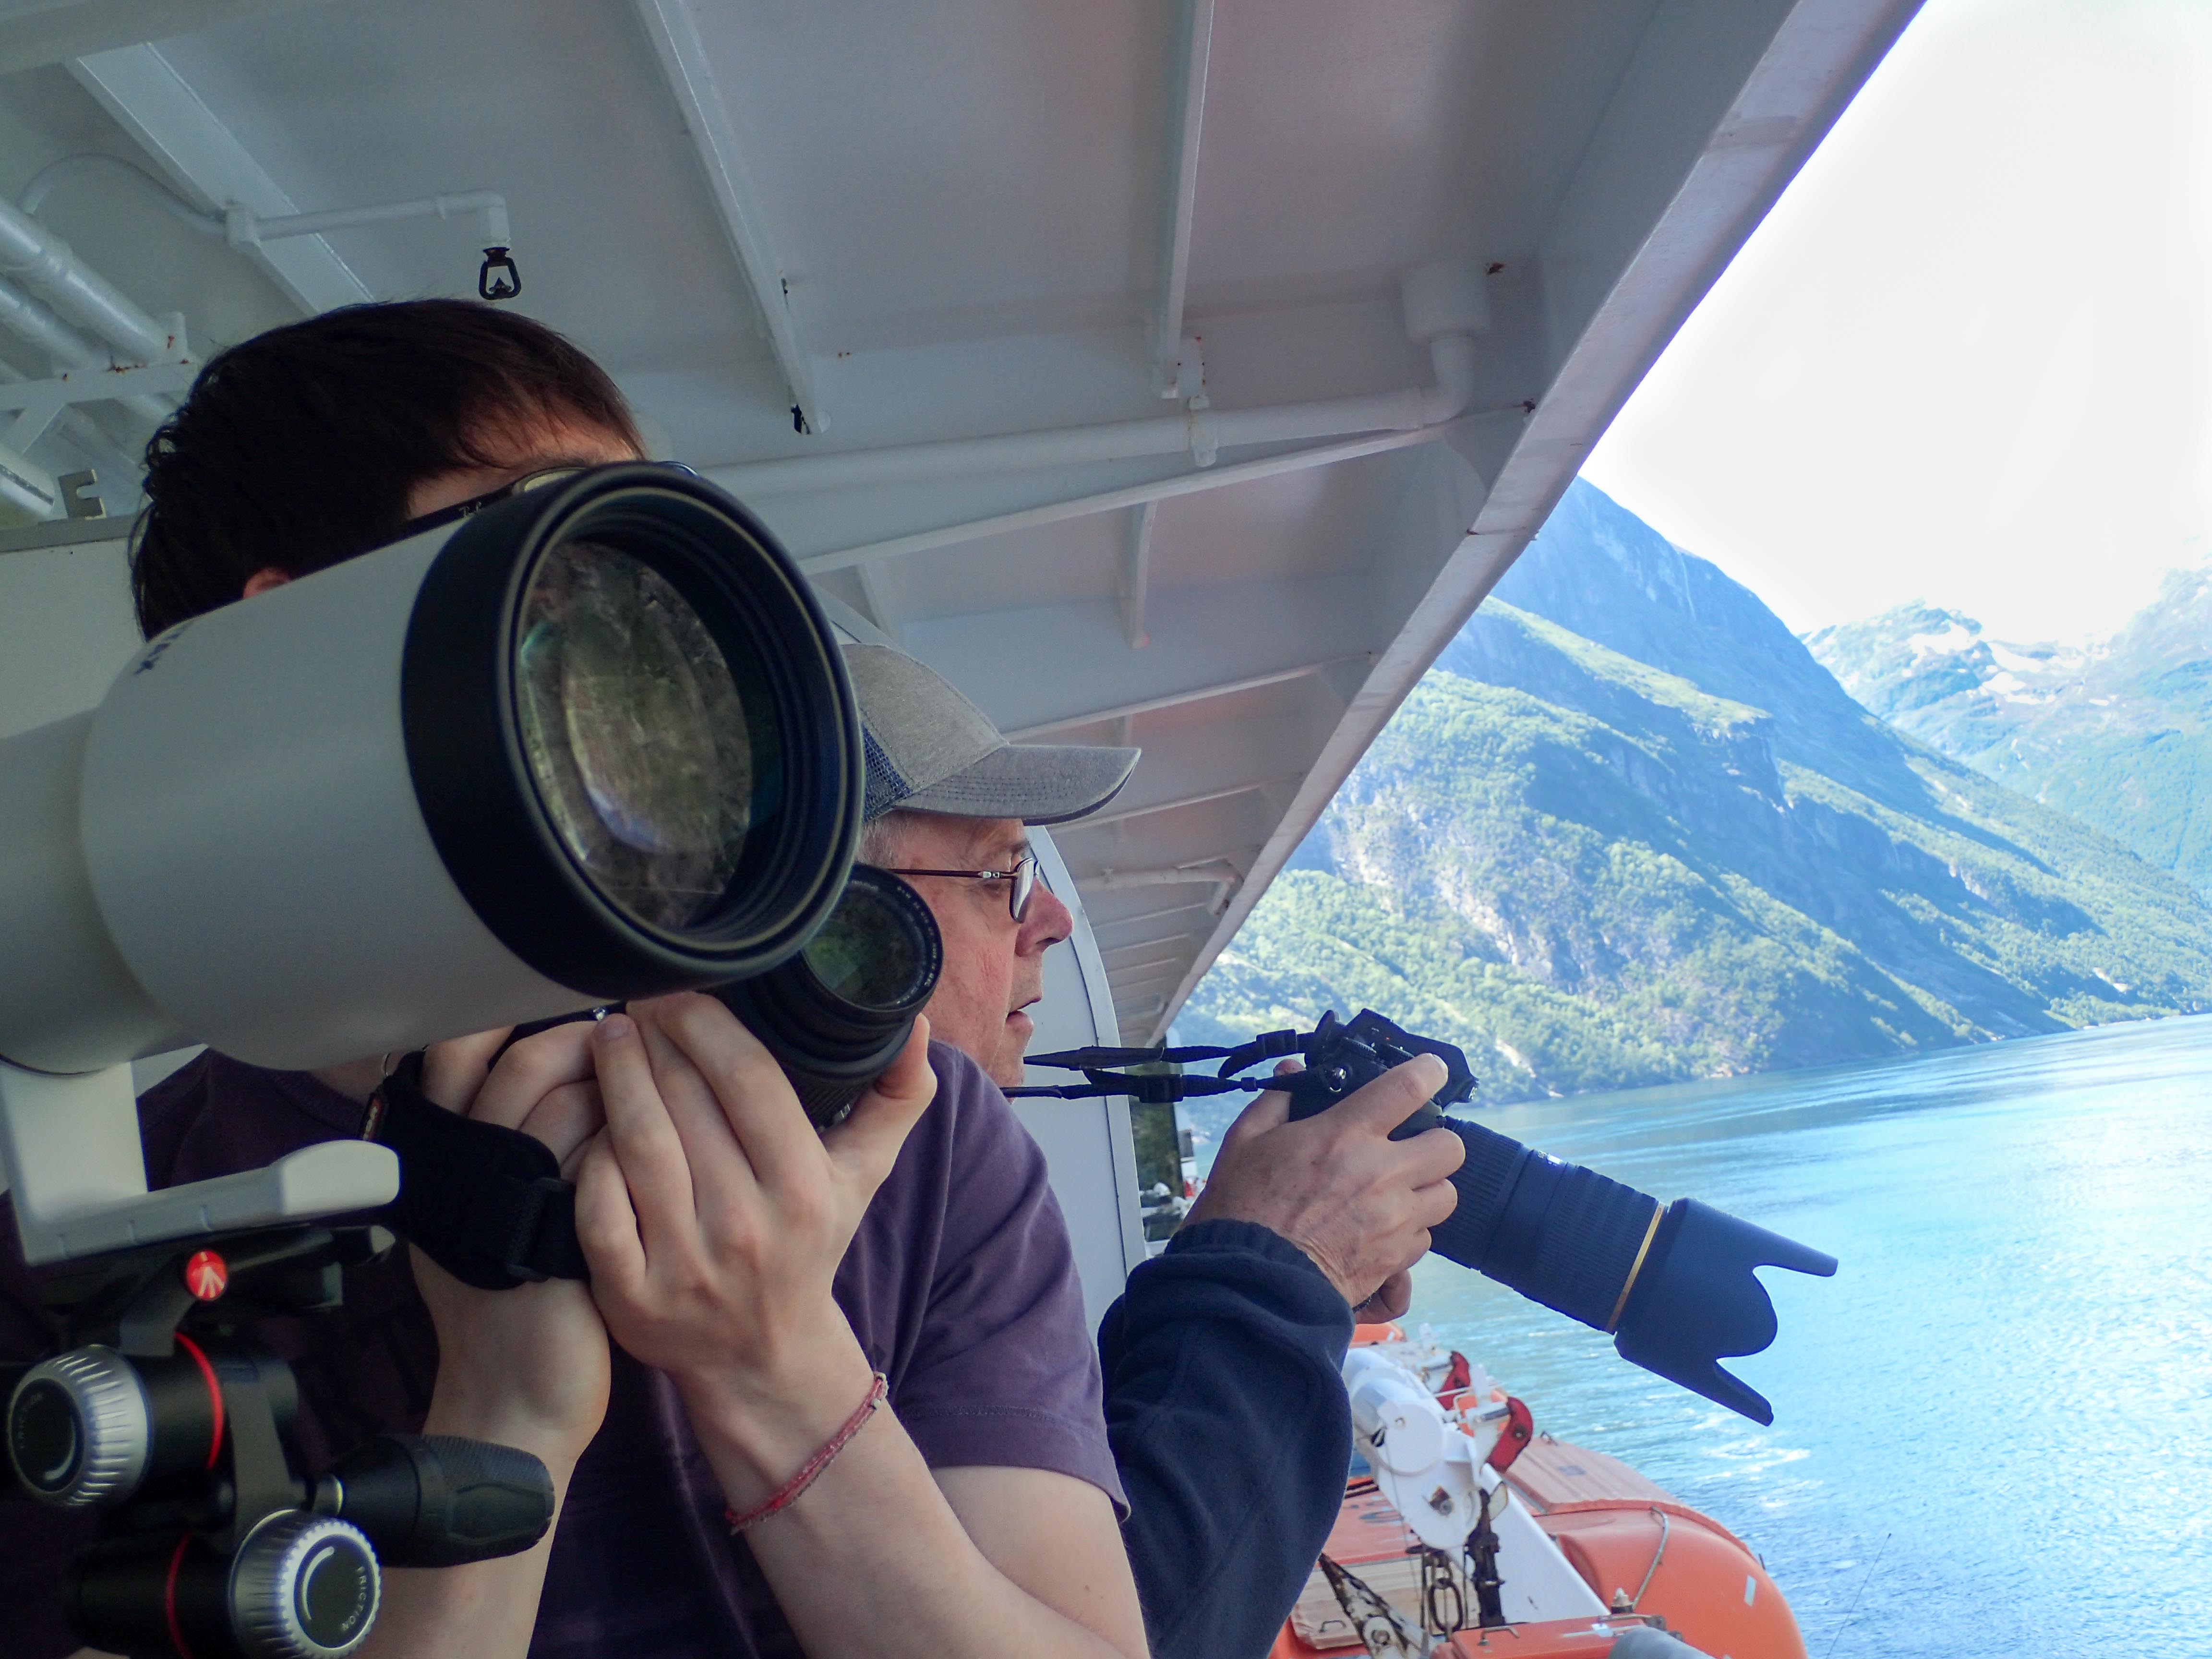 Photography with intent on a cruise ship balcony sailing the Norwegian Fjords. Photo by Wendy